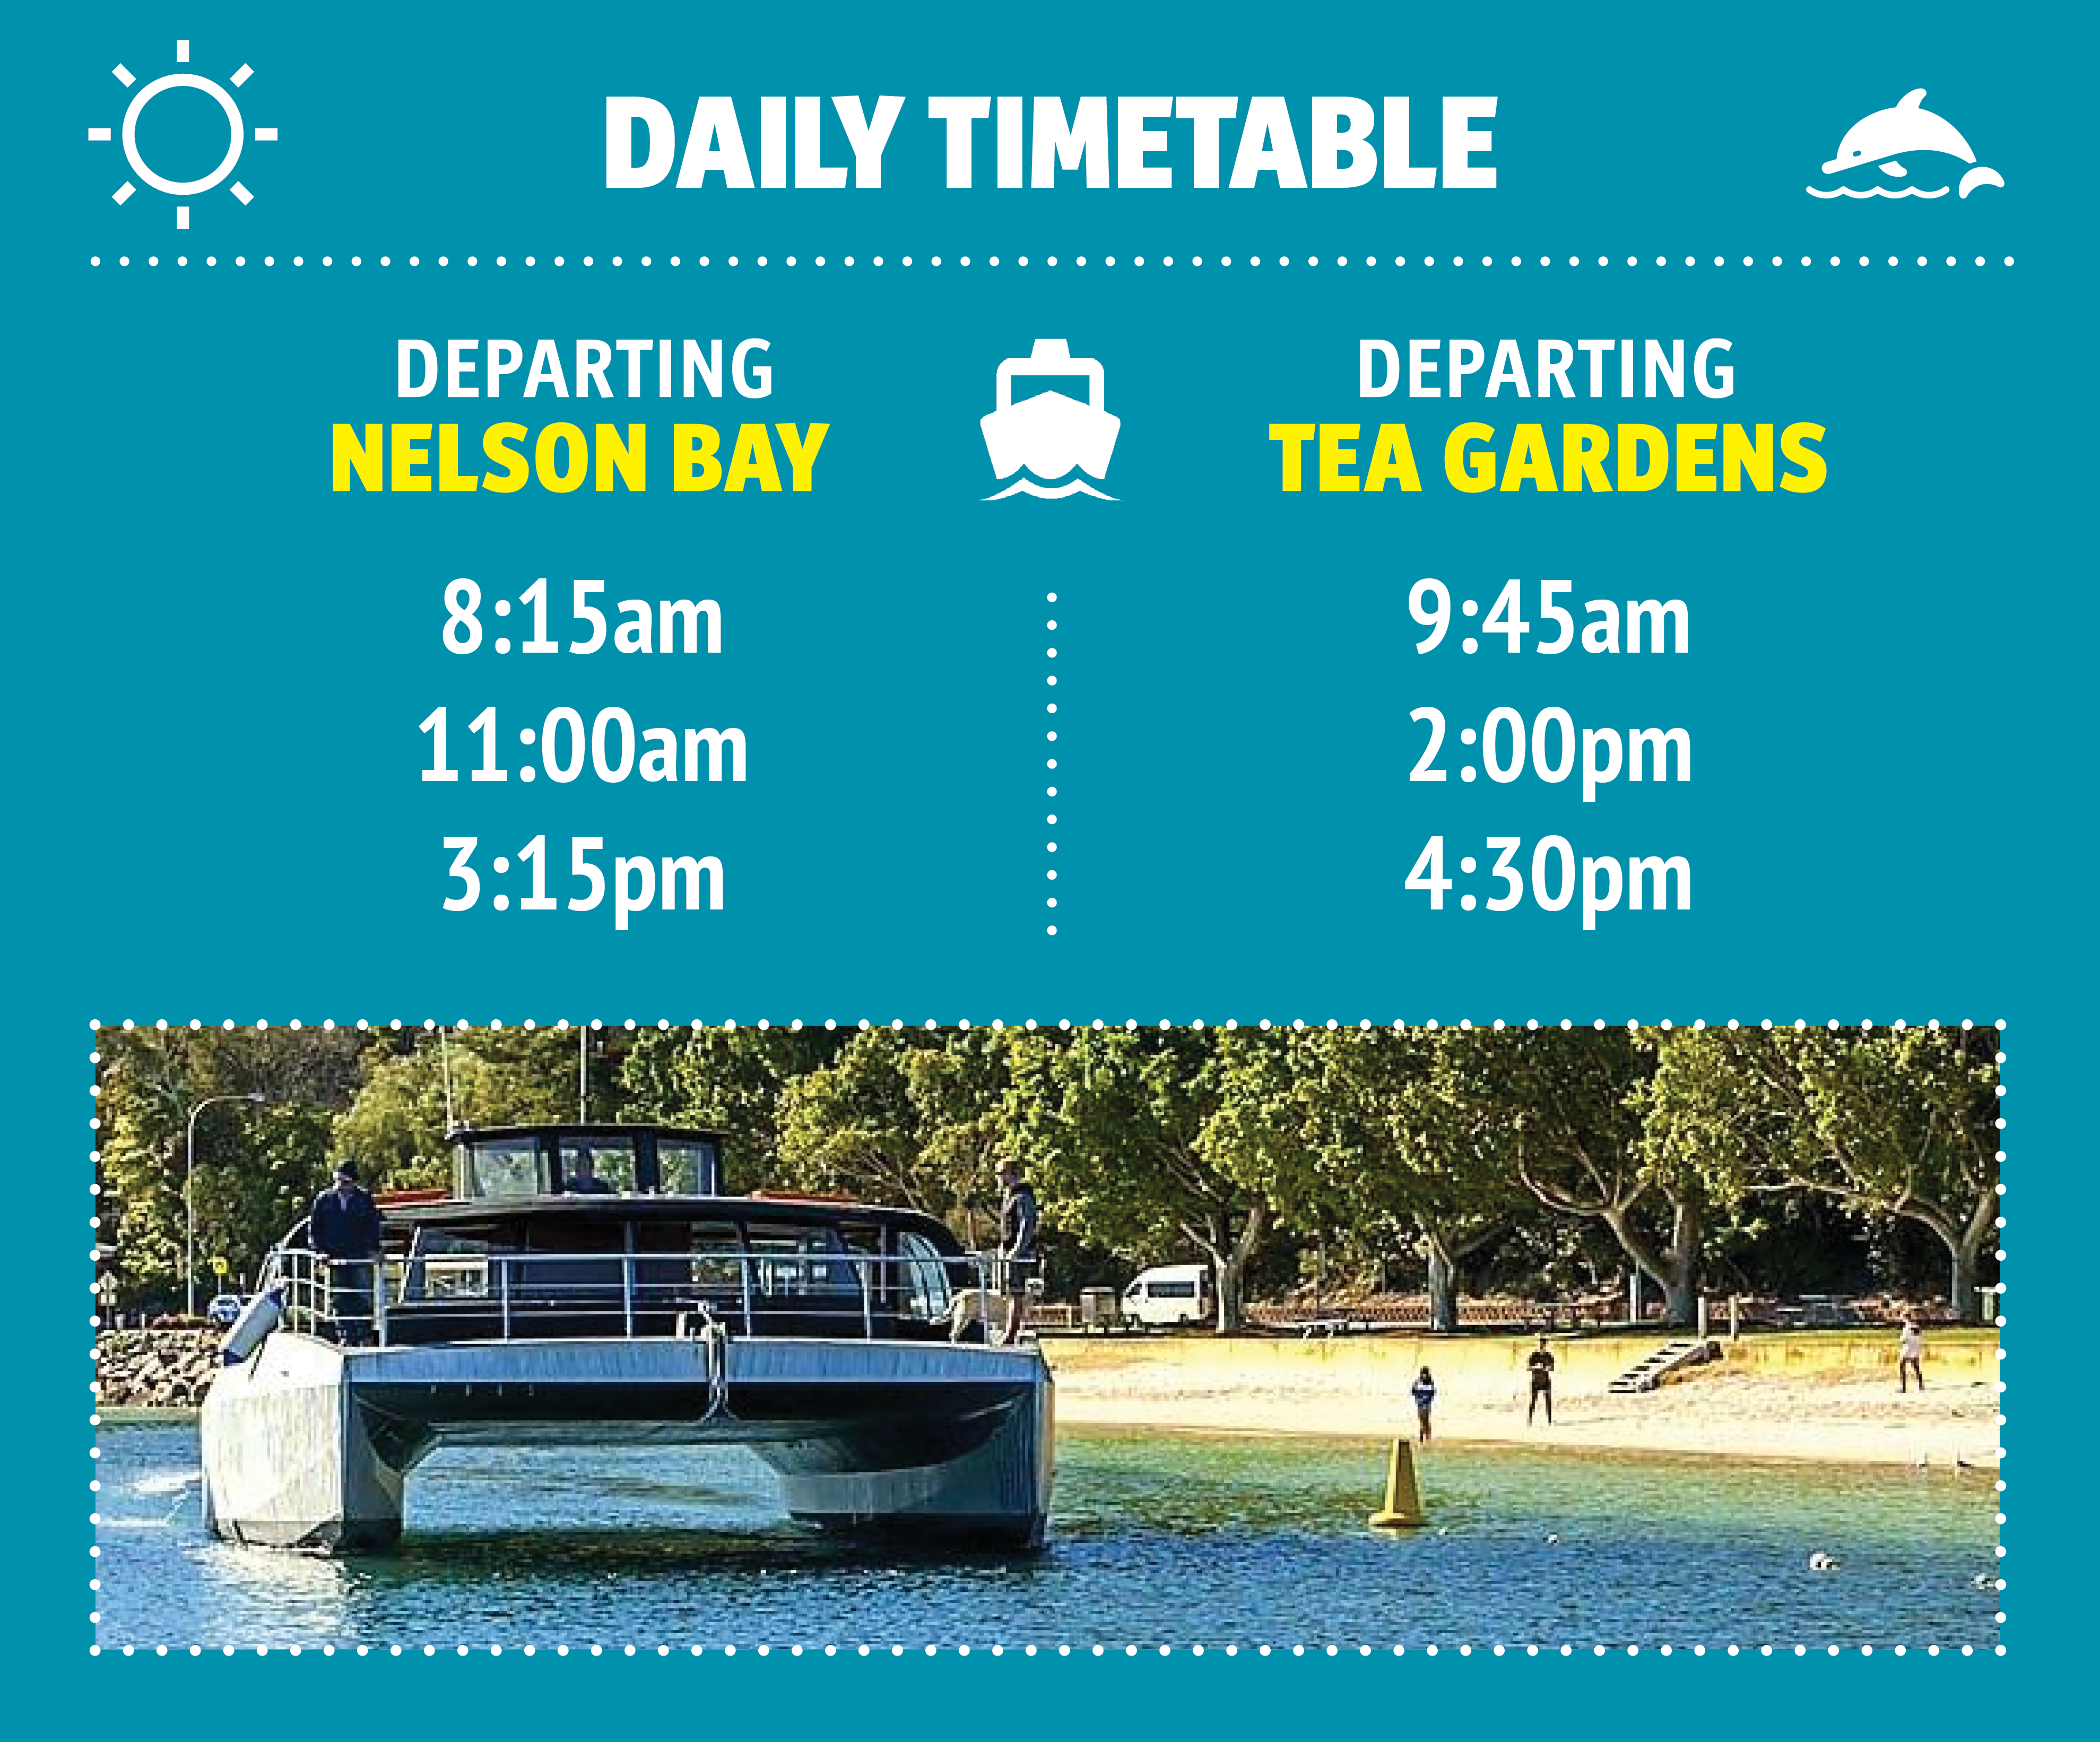 Daily timetable for Ferry to Tea Gardens